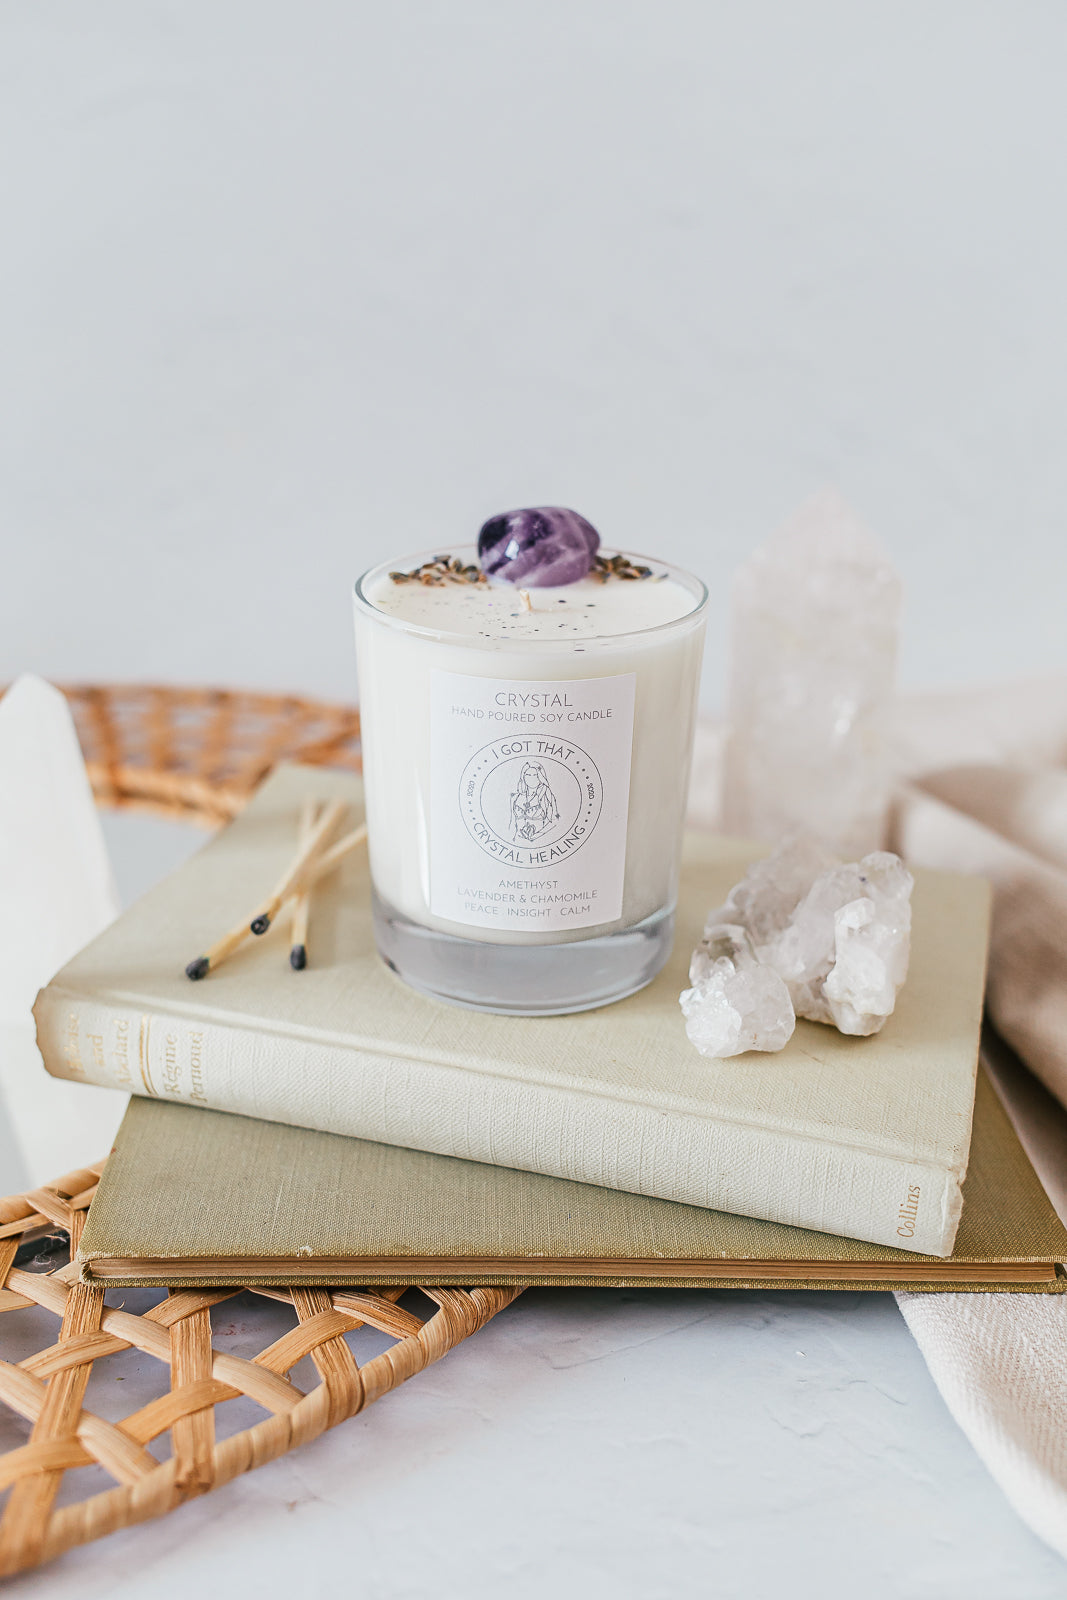 Classic Amethyst - Lavender & Camomile Candle